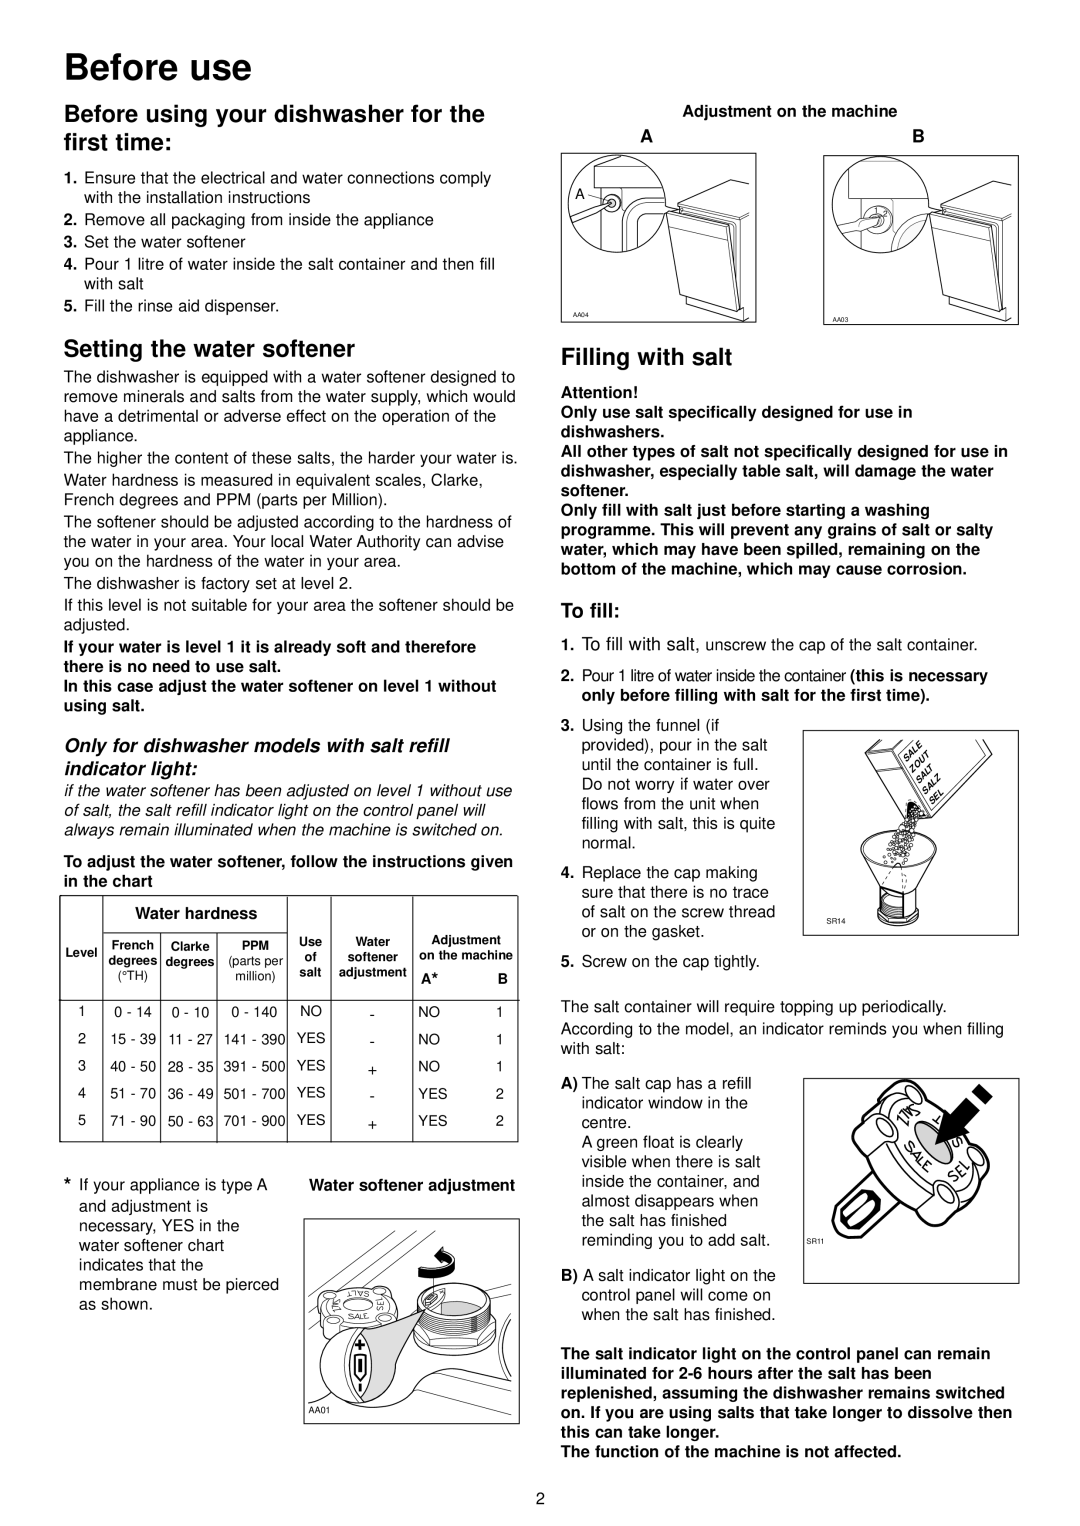 Zanussi DA 4131 manual Before use, Before using your dishwasher for the, first time, Setting the water softener, To fill 